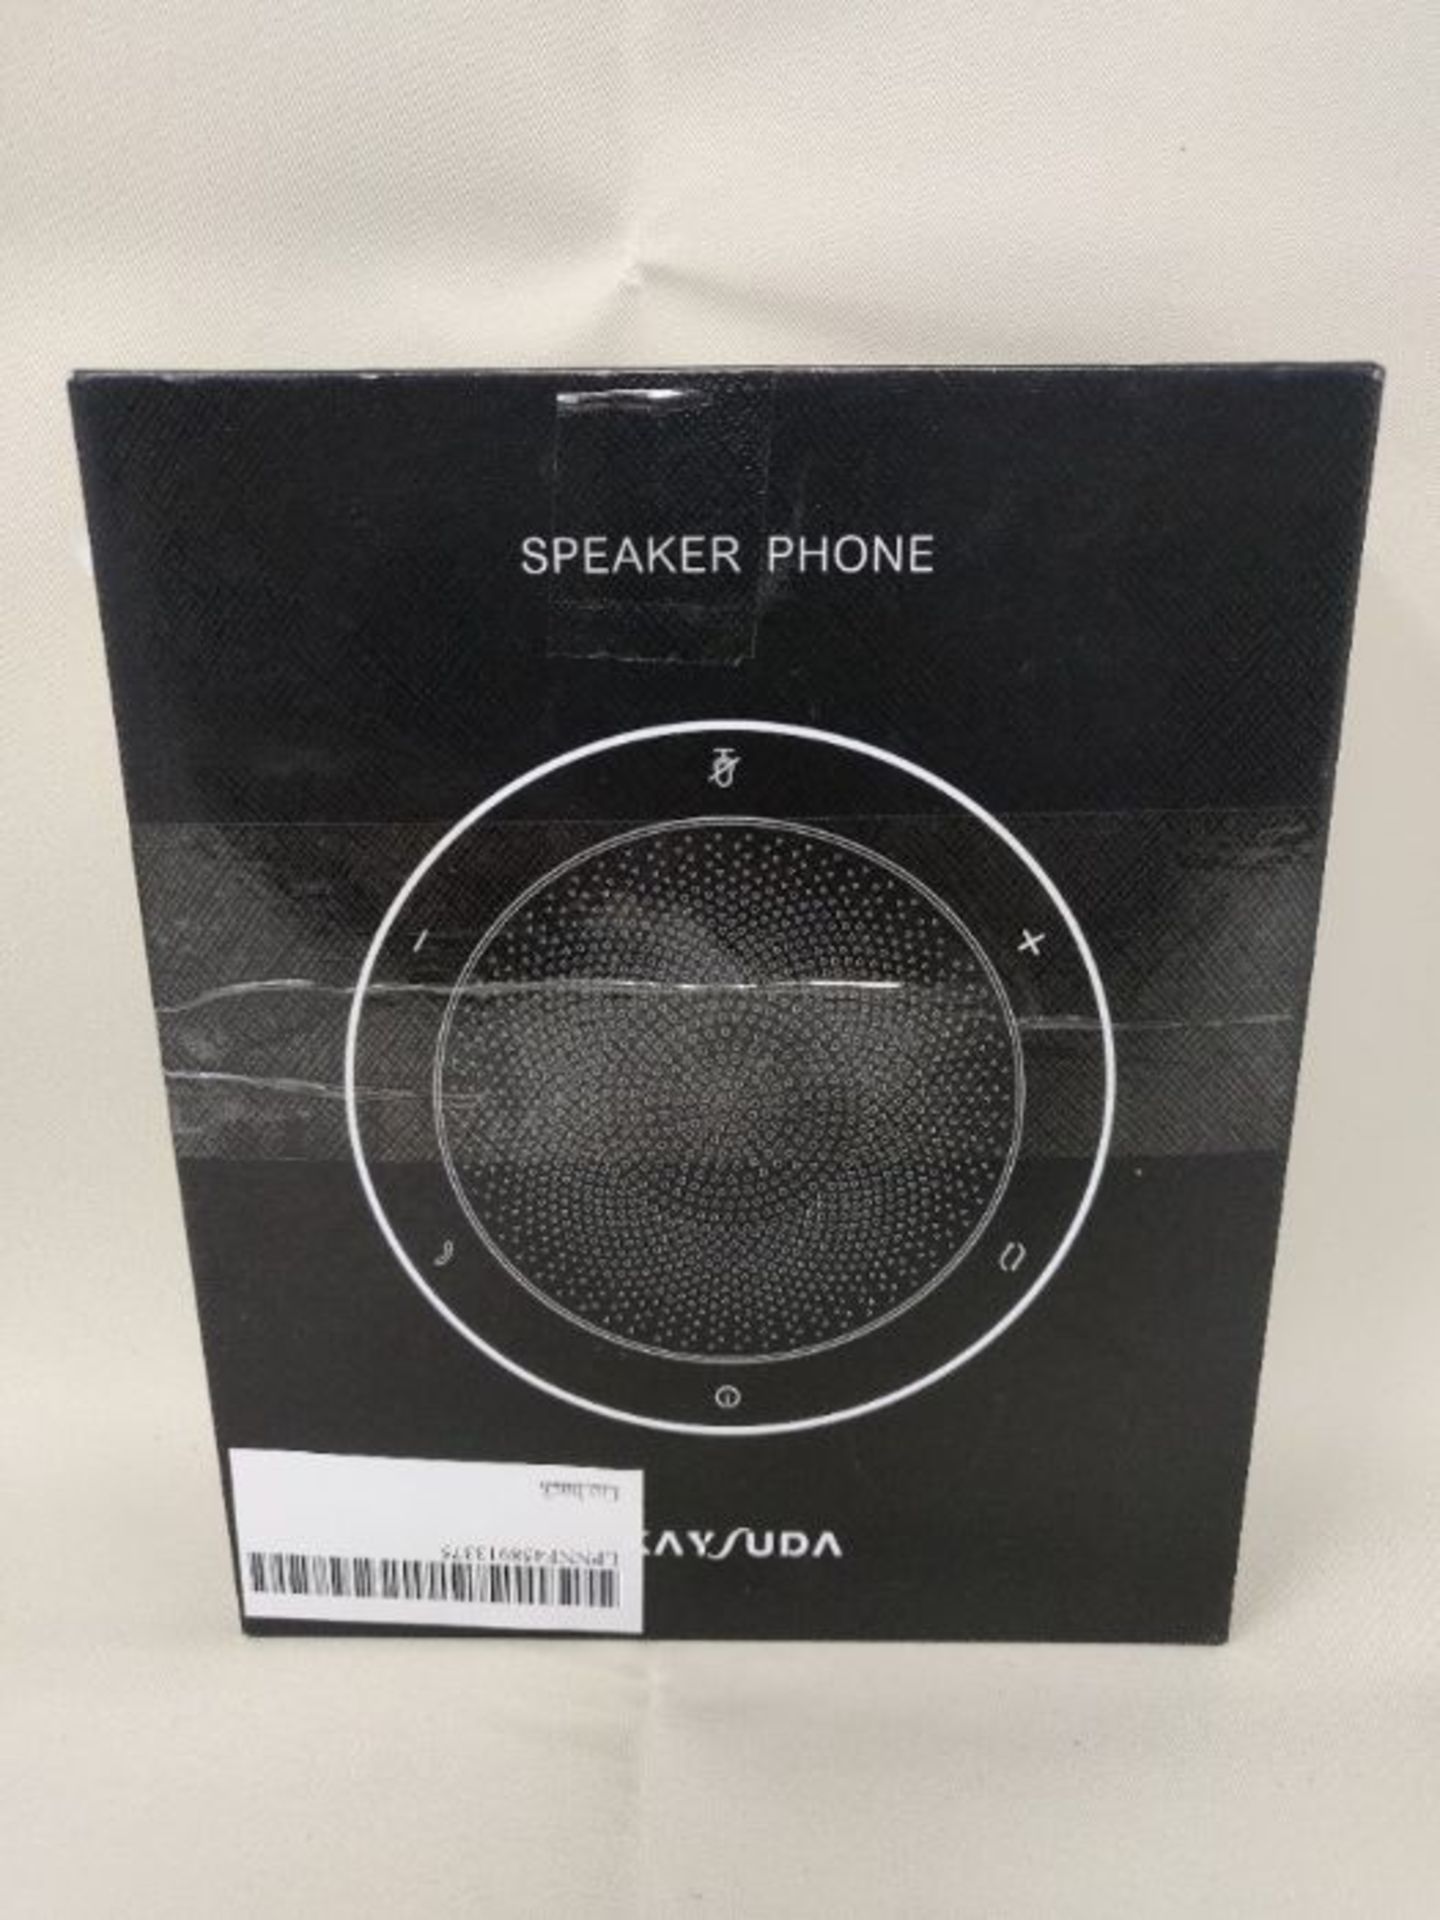 RRP £69.00 Kaysuda Bluetooth Conference Speakerphone Wireless Microphone and Speaker for Skype, Z - Image 2 of 3